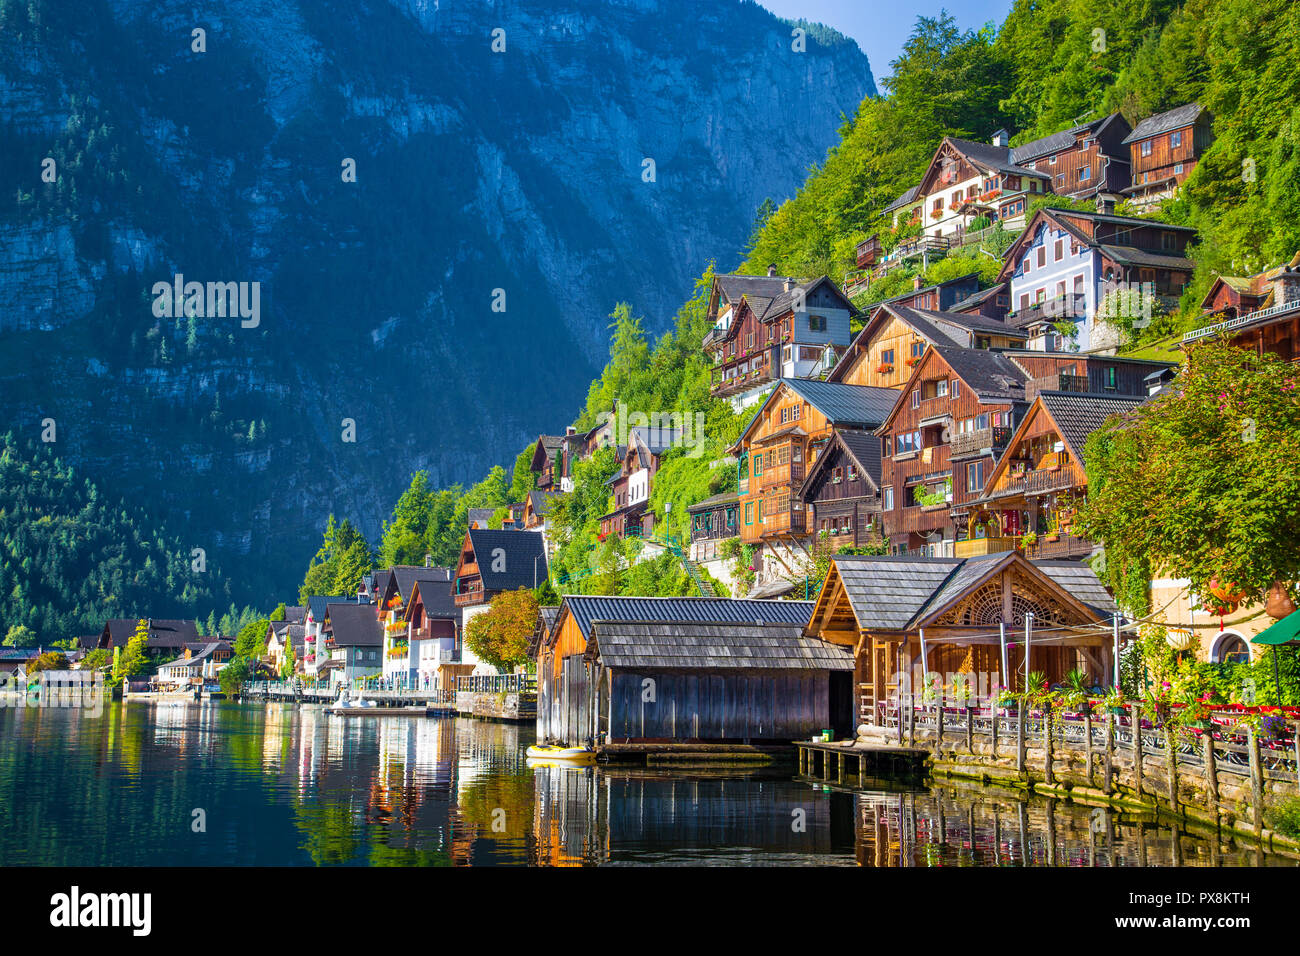 Traditional old wooden houses in famous Hallstatt mountain village at Hallstattersee lake in the Austrian Alps in summer, region of Salzkammergut, Aus Stock Photo